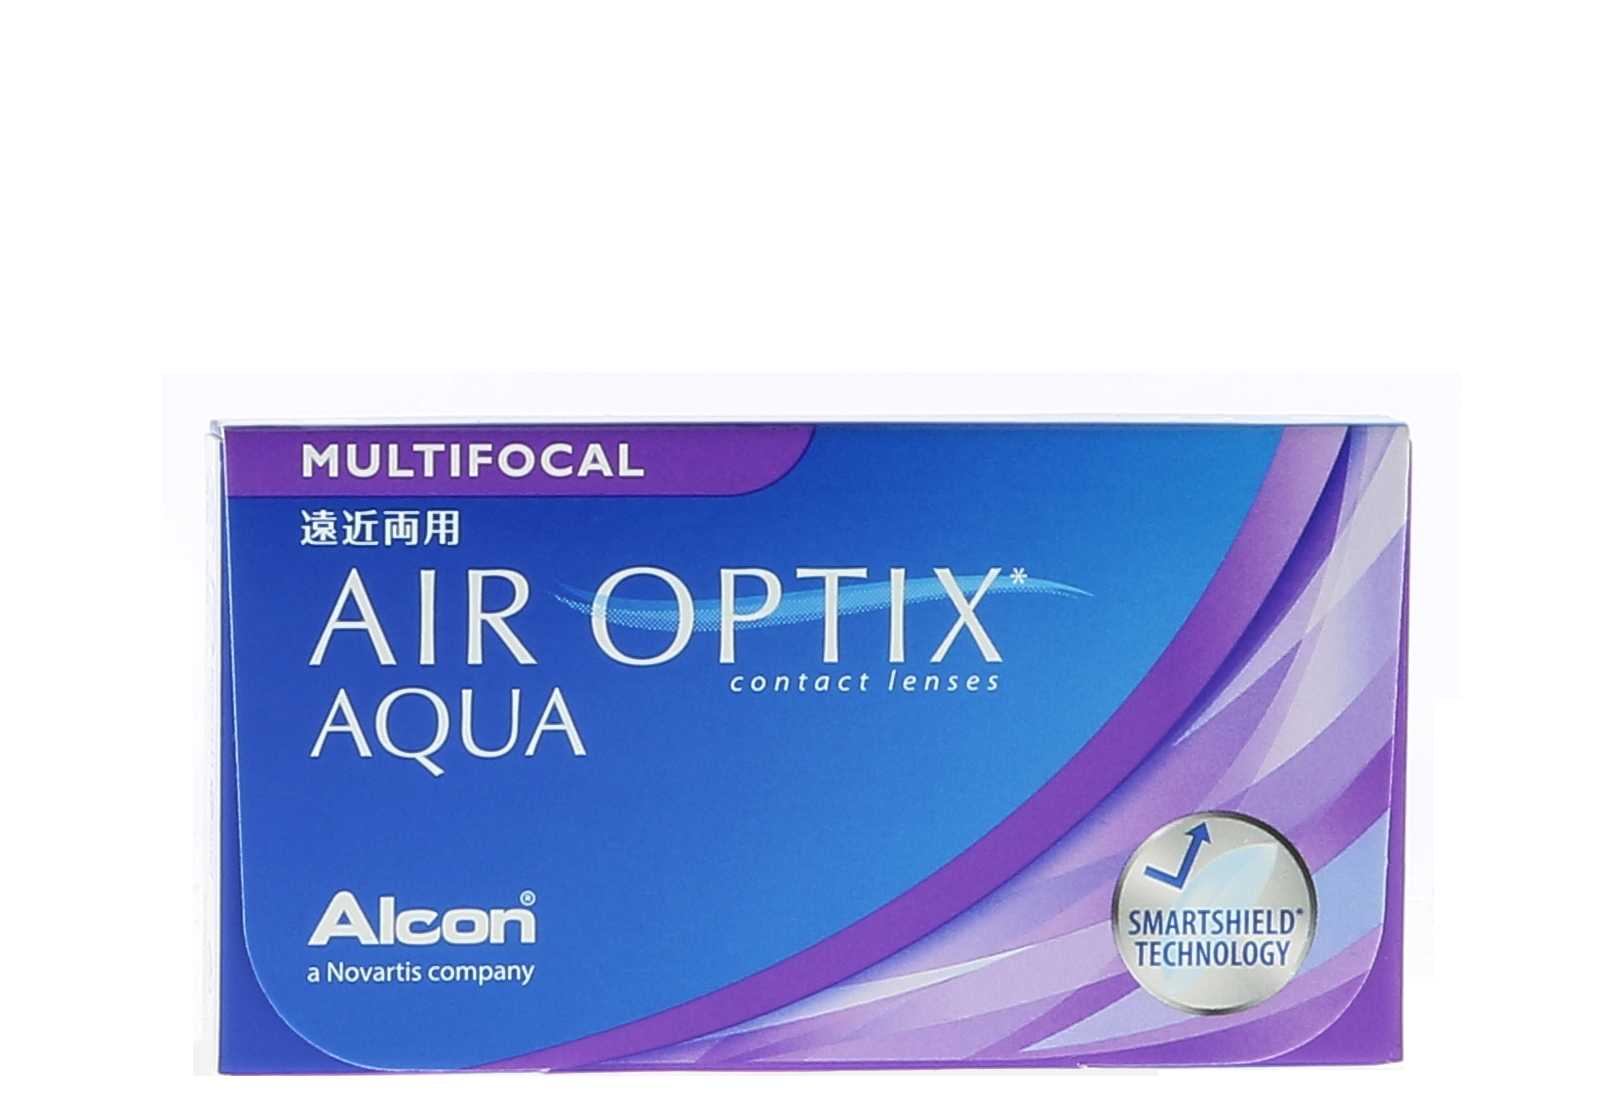 Air optix aqua multifocal by alcon best prices carefirst blue cross provider phone number